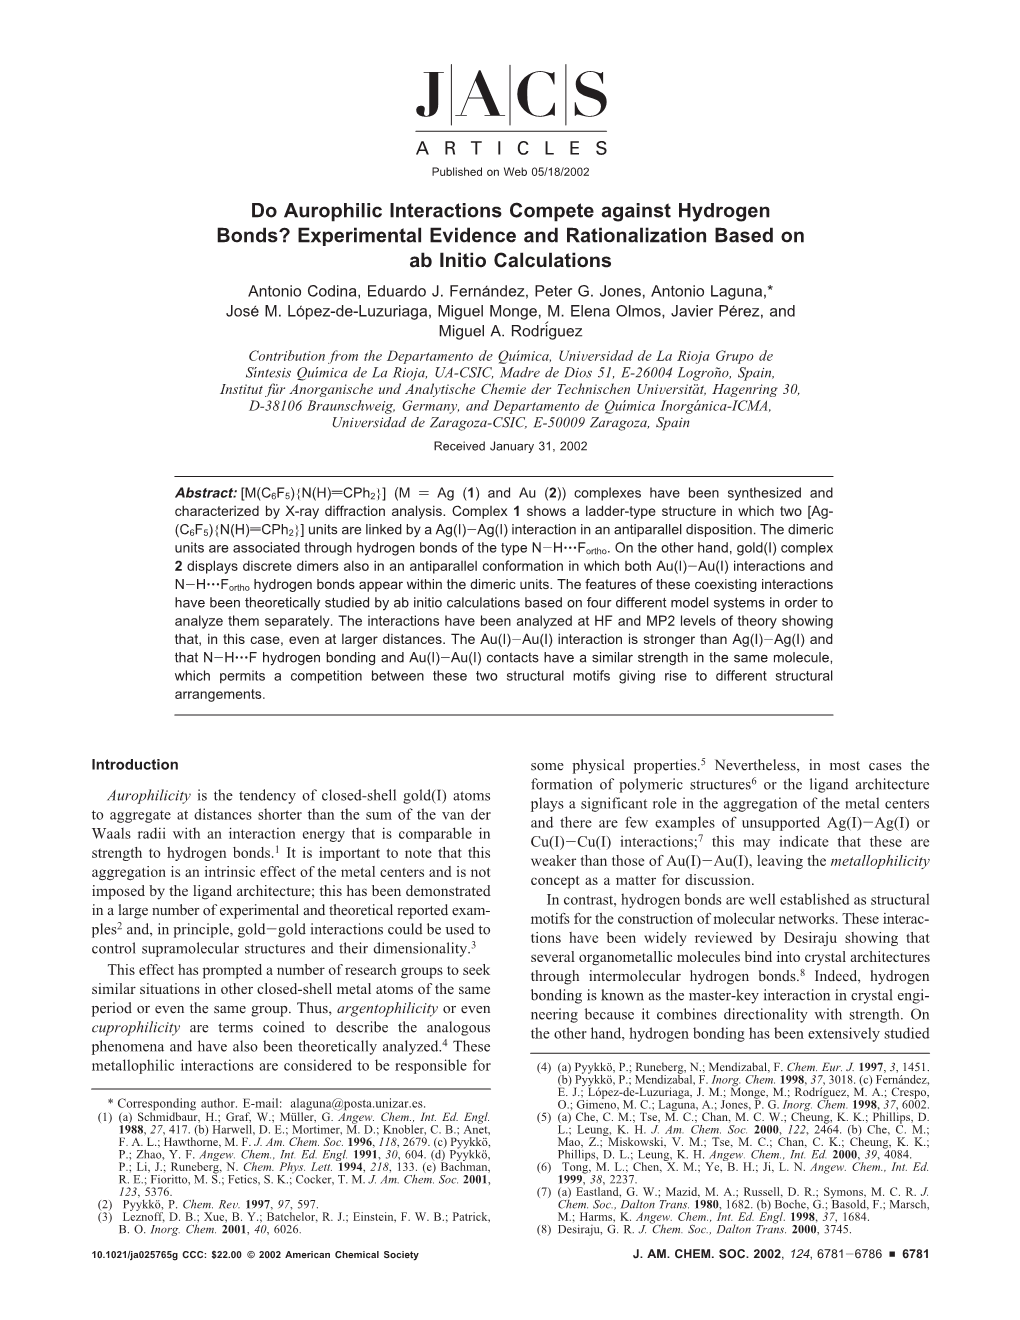 Do Aurophilic Interactions Compete Against Hydrogen Bonds? Experimental Evidence and Rationalization Based on Ab Initio Calculations Antonio Codina, Eduardo J